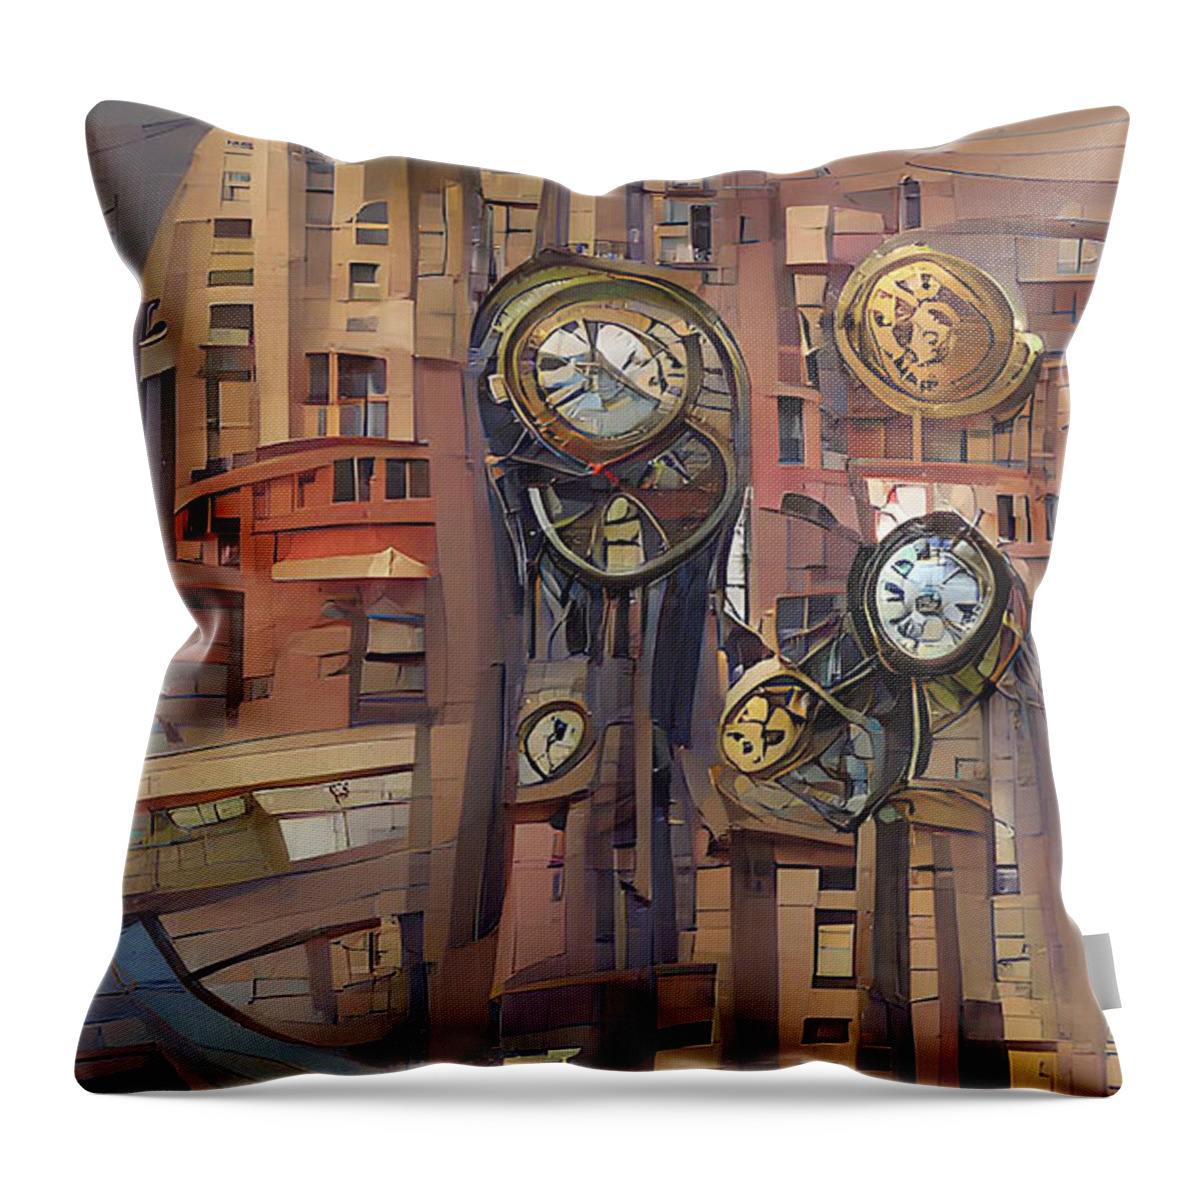 Richard Reeve Throw Pillow featuring the digital art No Time Left by Richard Reeve